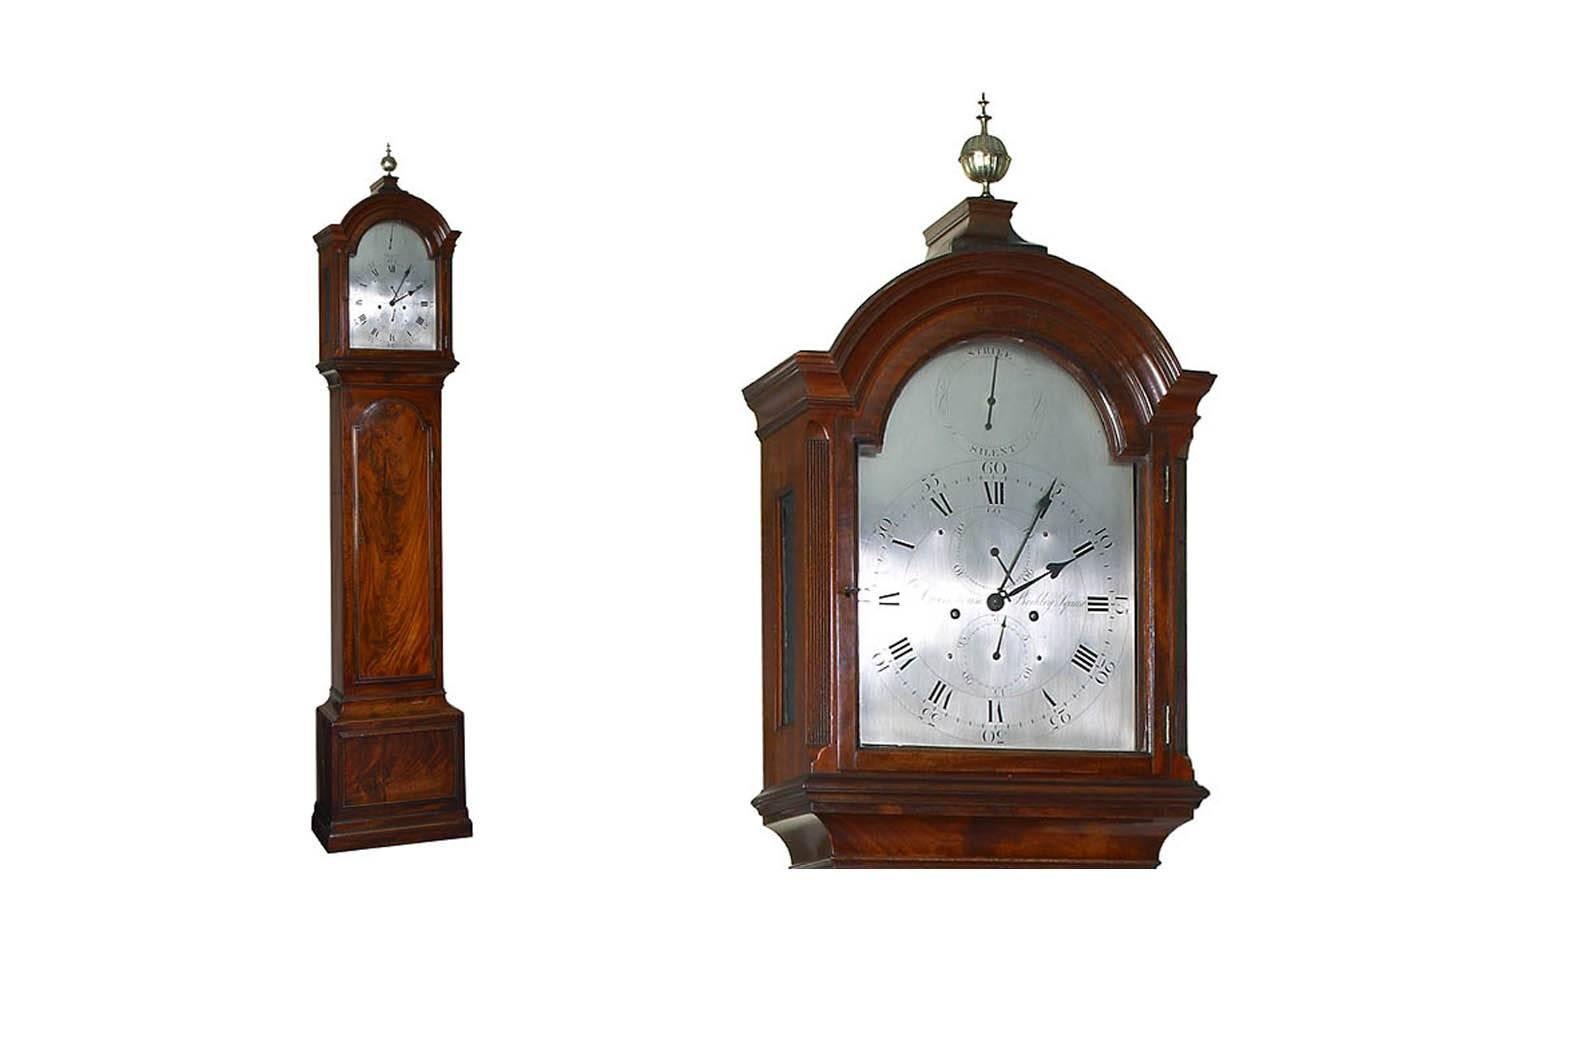 A Fine English mahogany longcase clock Dwerrihouse Berkeley square London, circa 1780 arched engraved silvered dial with Roman numerals and five minute marking signed Dwerrihouse Berkley Square, blued spade hands and subsidiaries for date and